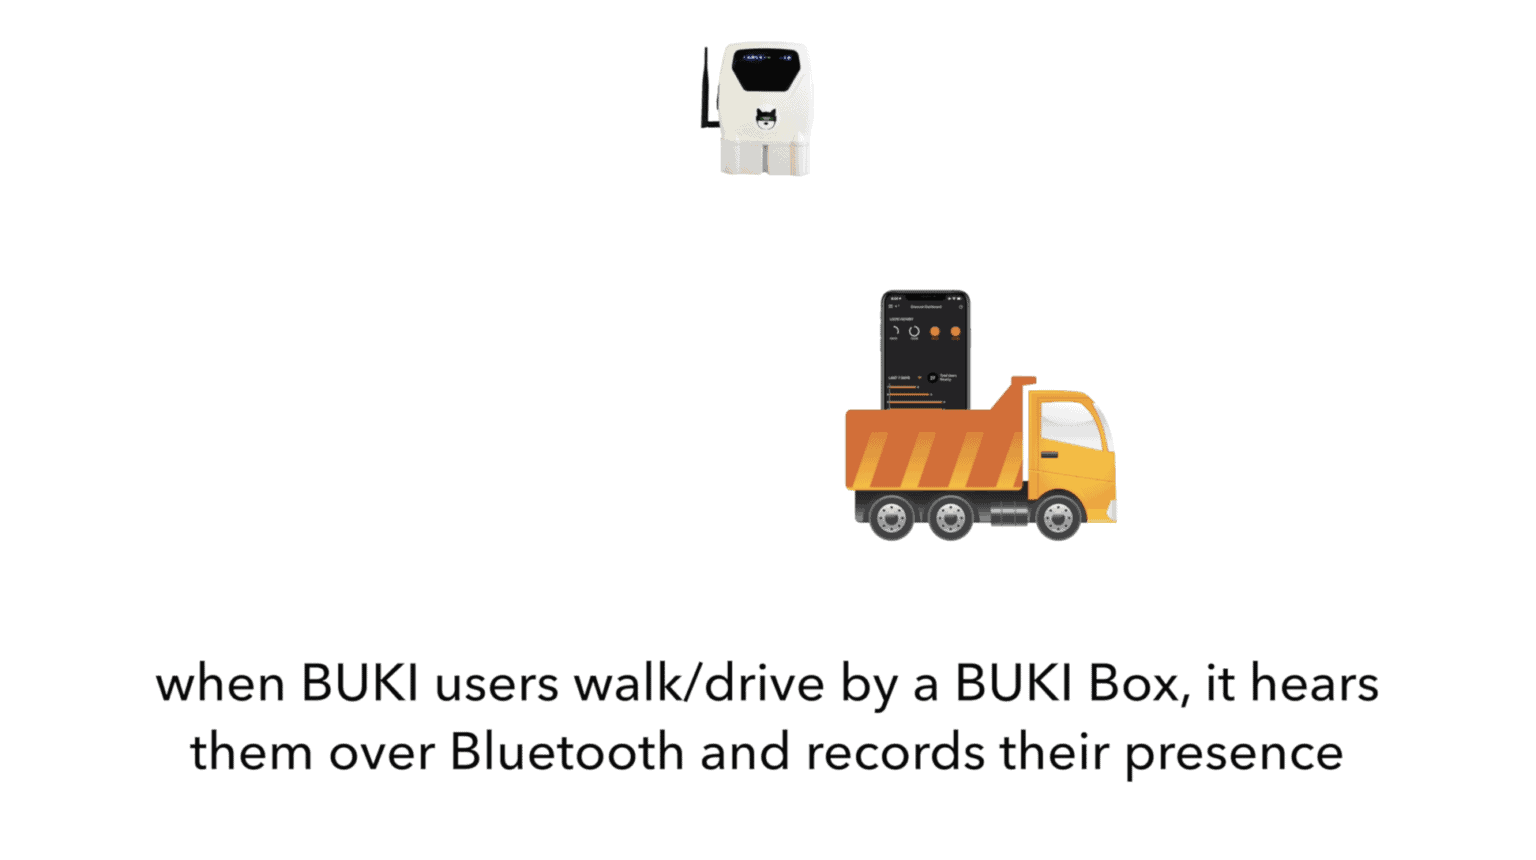 illustration of a BUKI Box with a dump truck driving by it with a smart phone in the truck